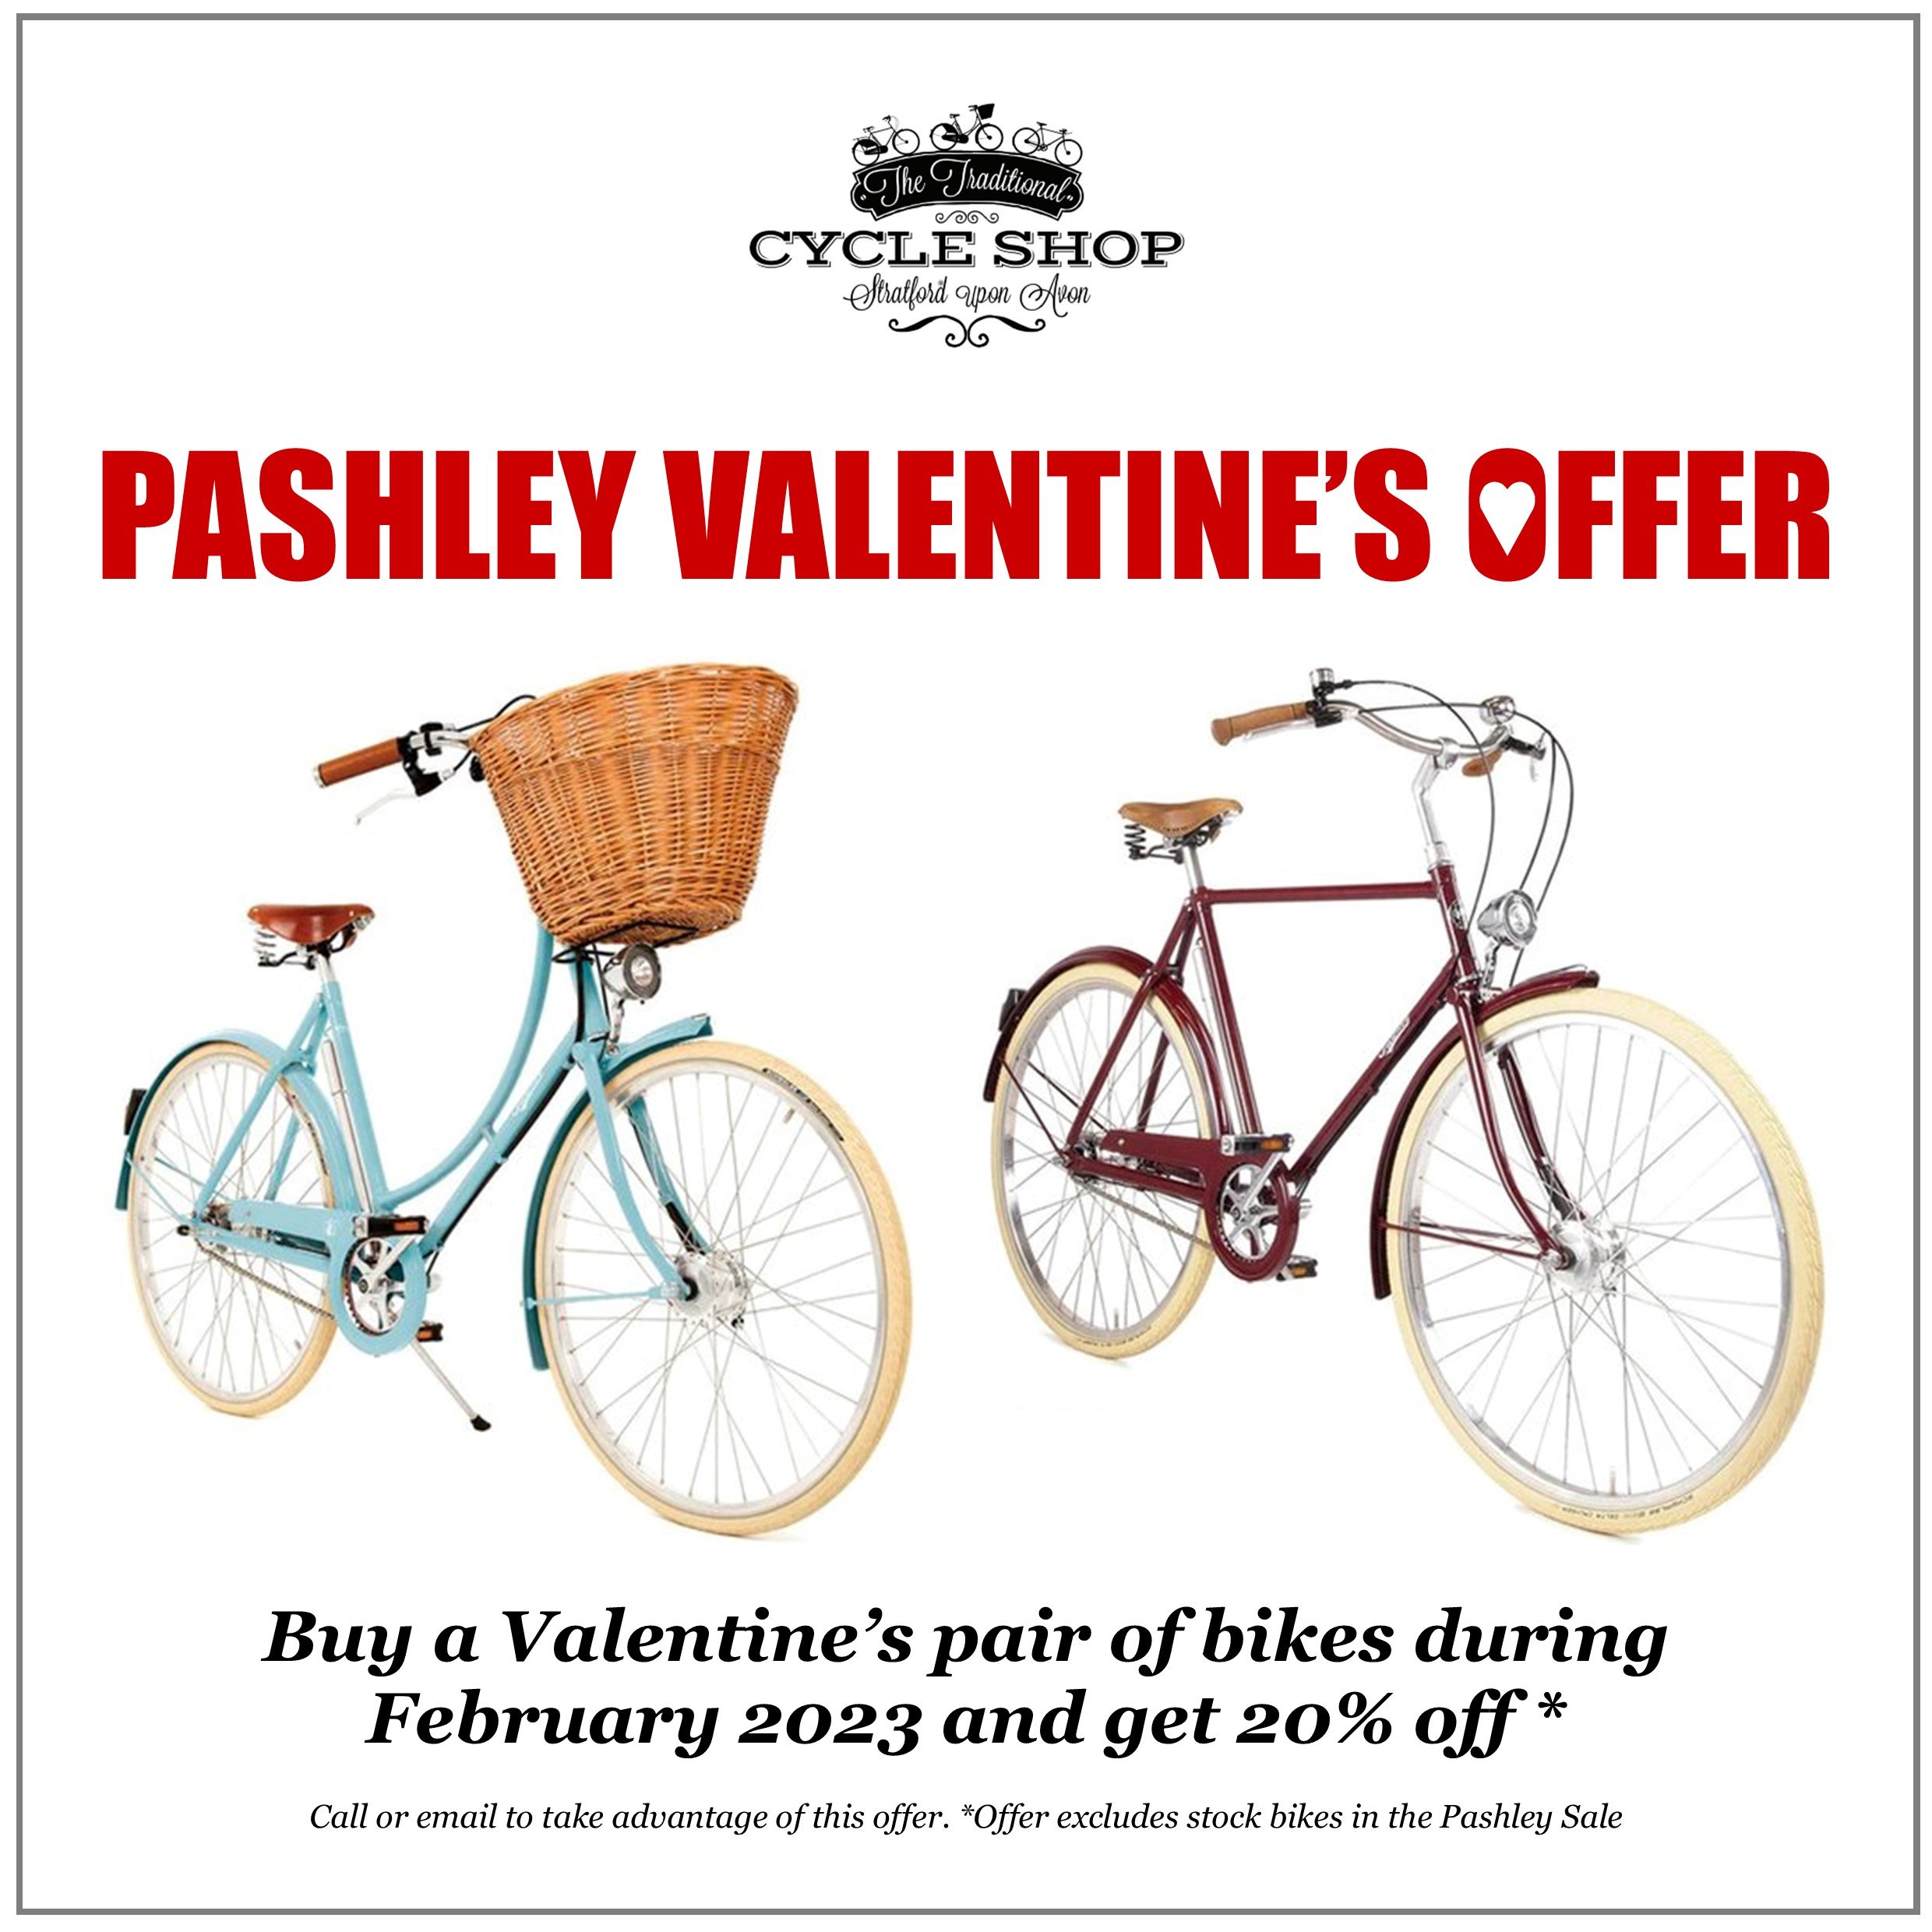 Pashley Valentines Offer — The Traditional Cycle Shop